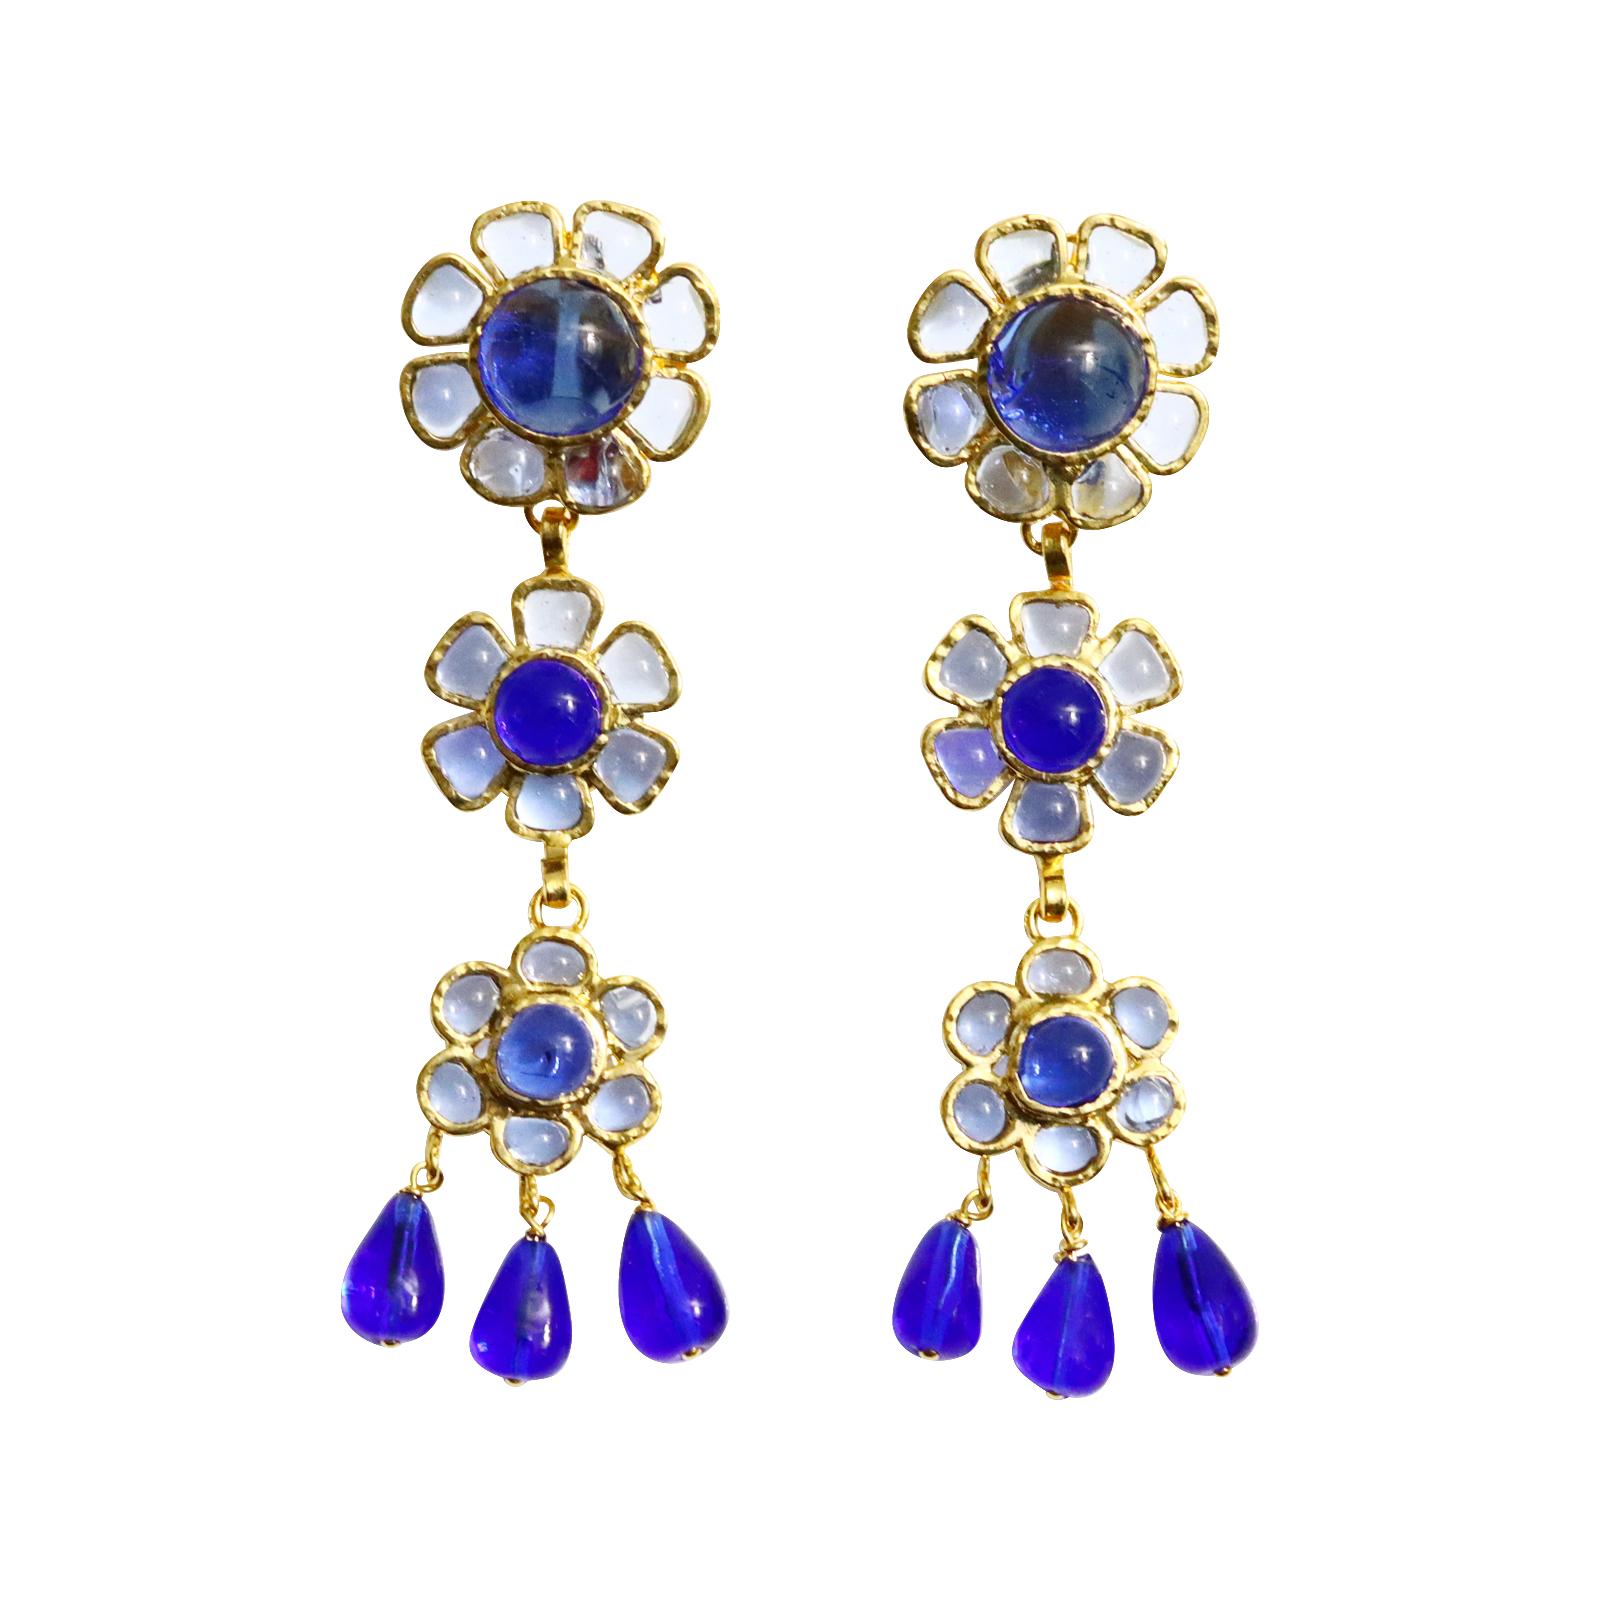 Maison Gripoix Vintage Blue and Light Blue Flower Dangling Earrings Circa 1980s In Excellent Condition For Sale In New York, NY